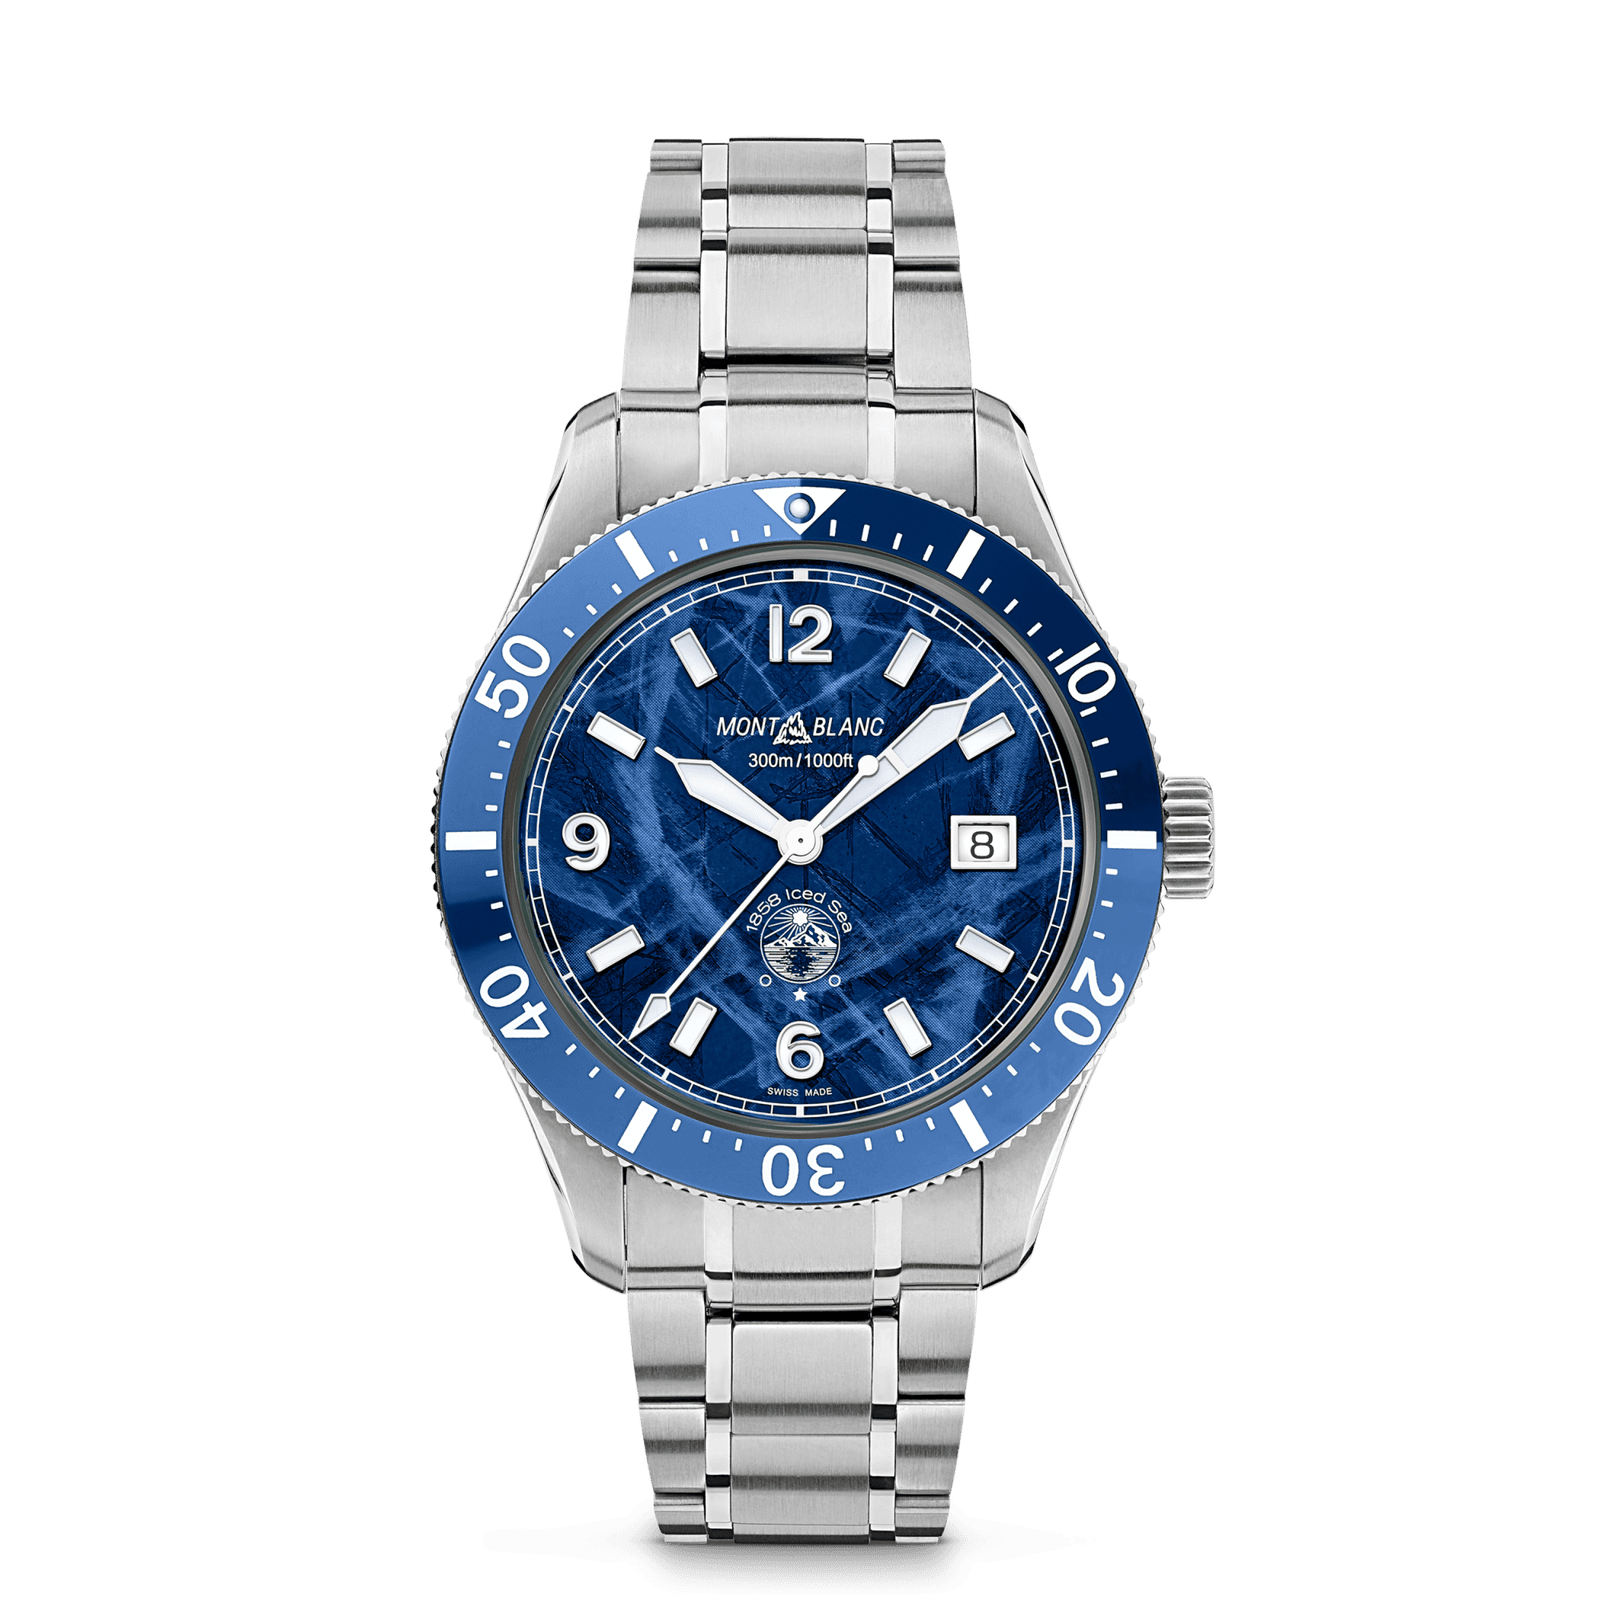 Father’s Day Gifting Guide 2022: What Would You Pair The Watch With?